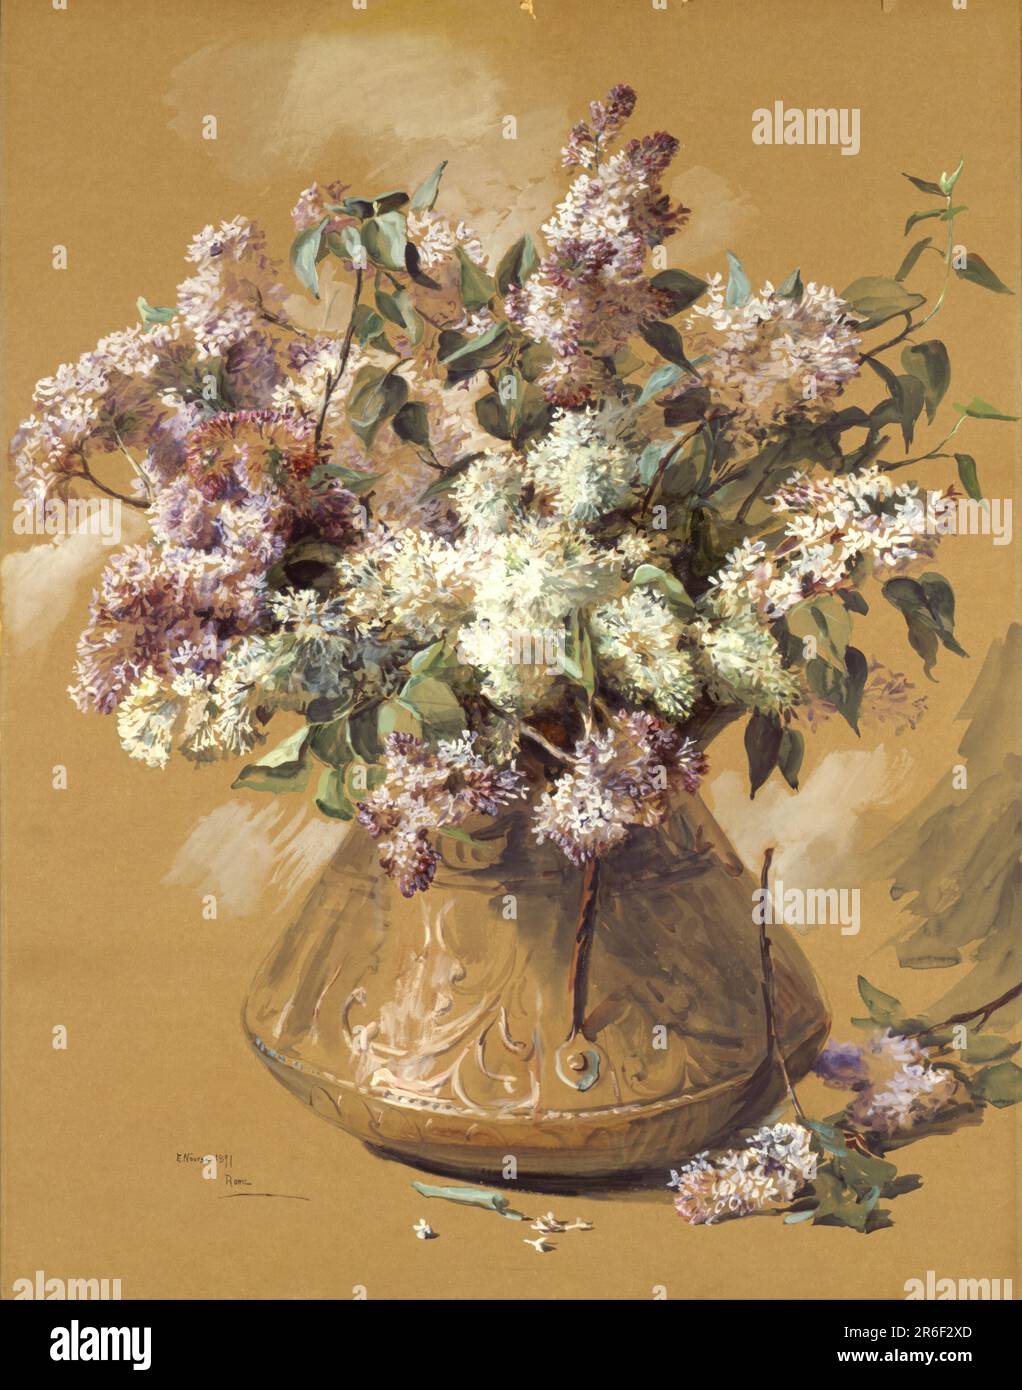 Lilacs. Date: 1891. opaque watercolor and watercolor on fiberboard. Museum: Smithsonian American Art Museum. Stock Photo